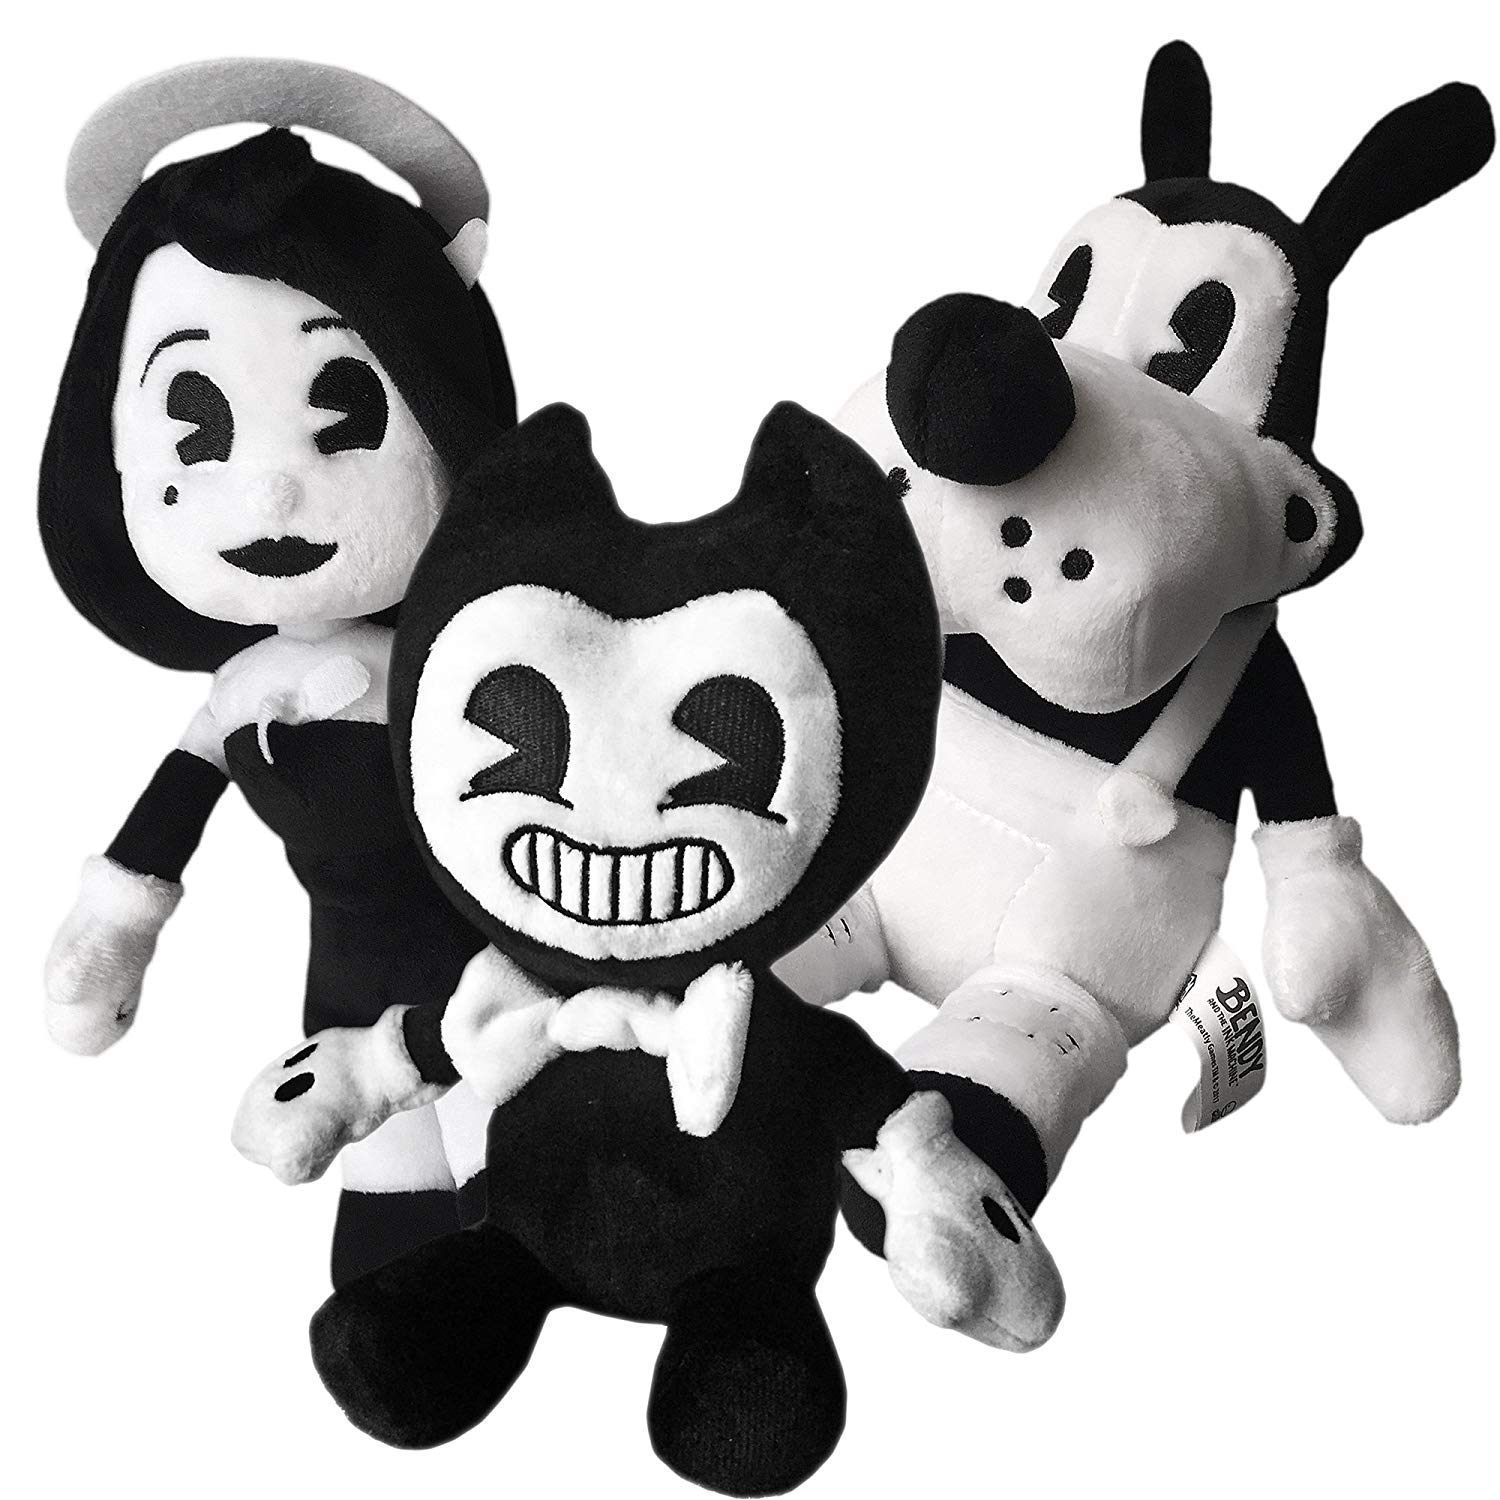 INK BENDY Plush 8 Black & White Bendy and the Ink Machine NEW